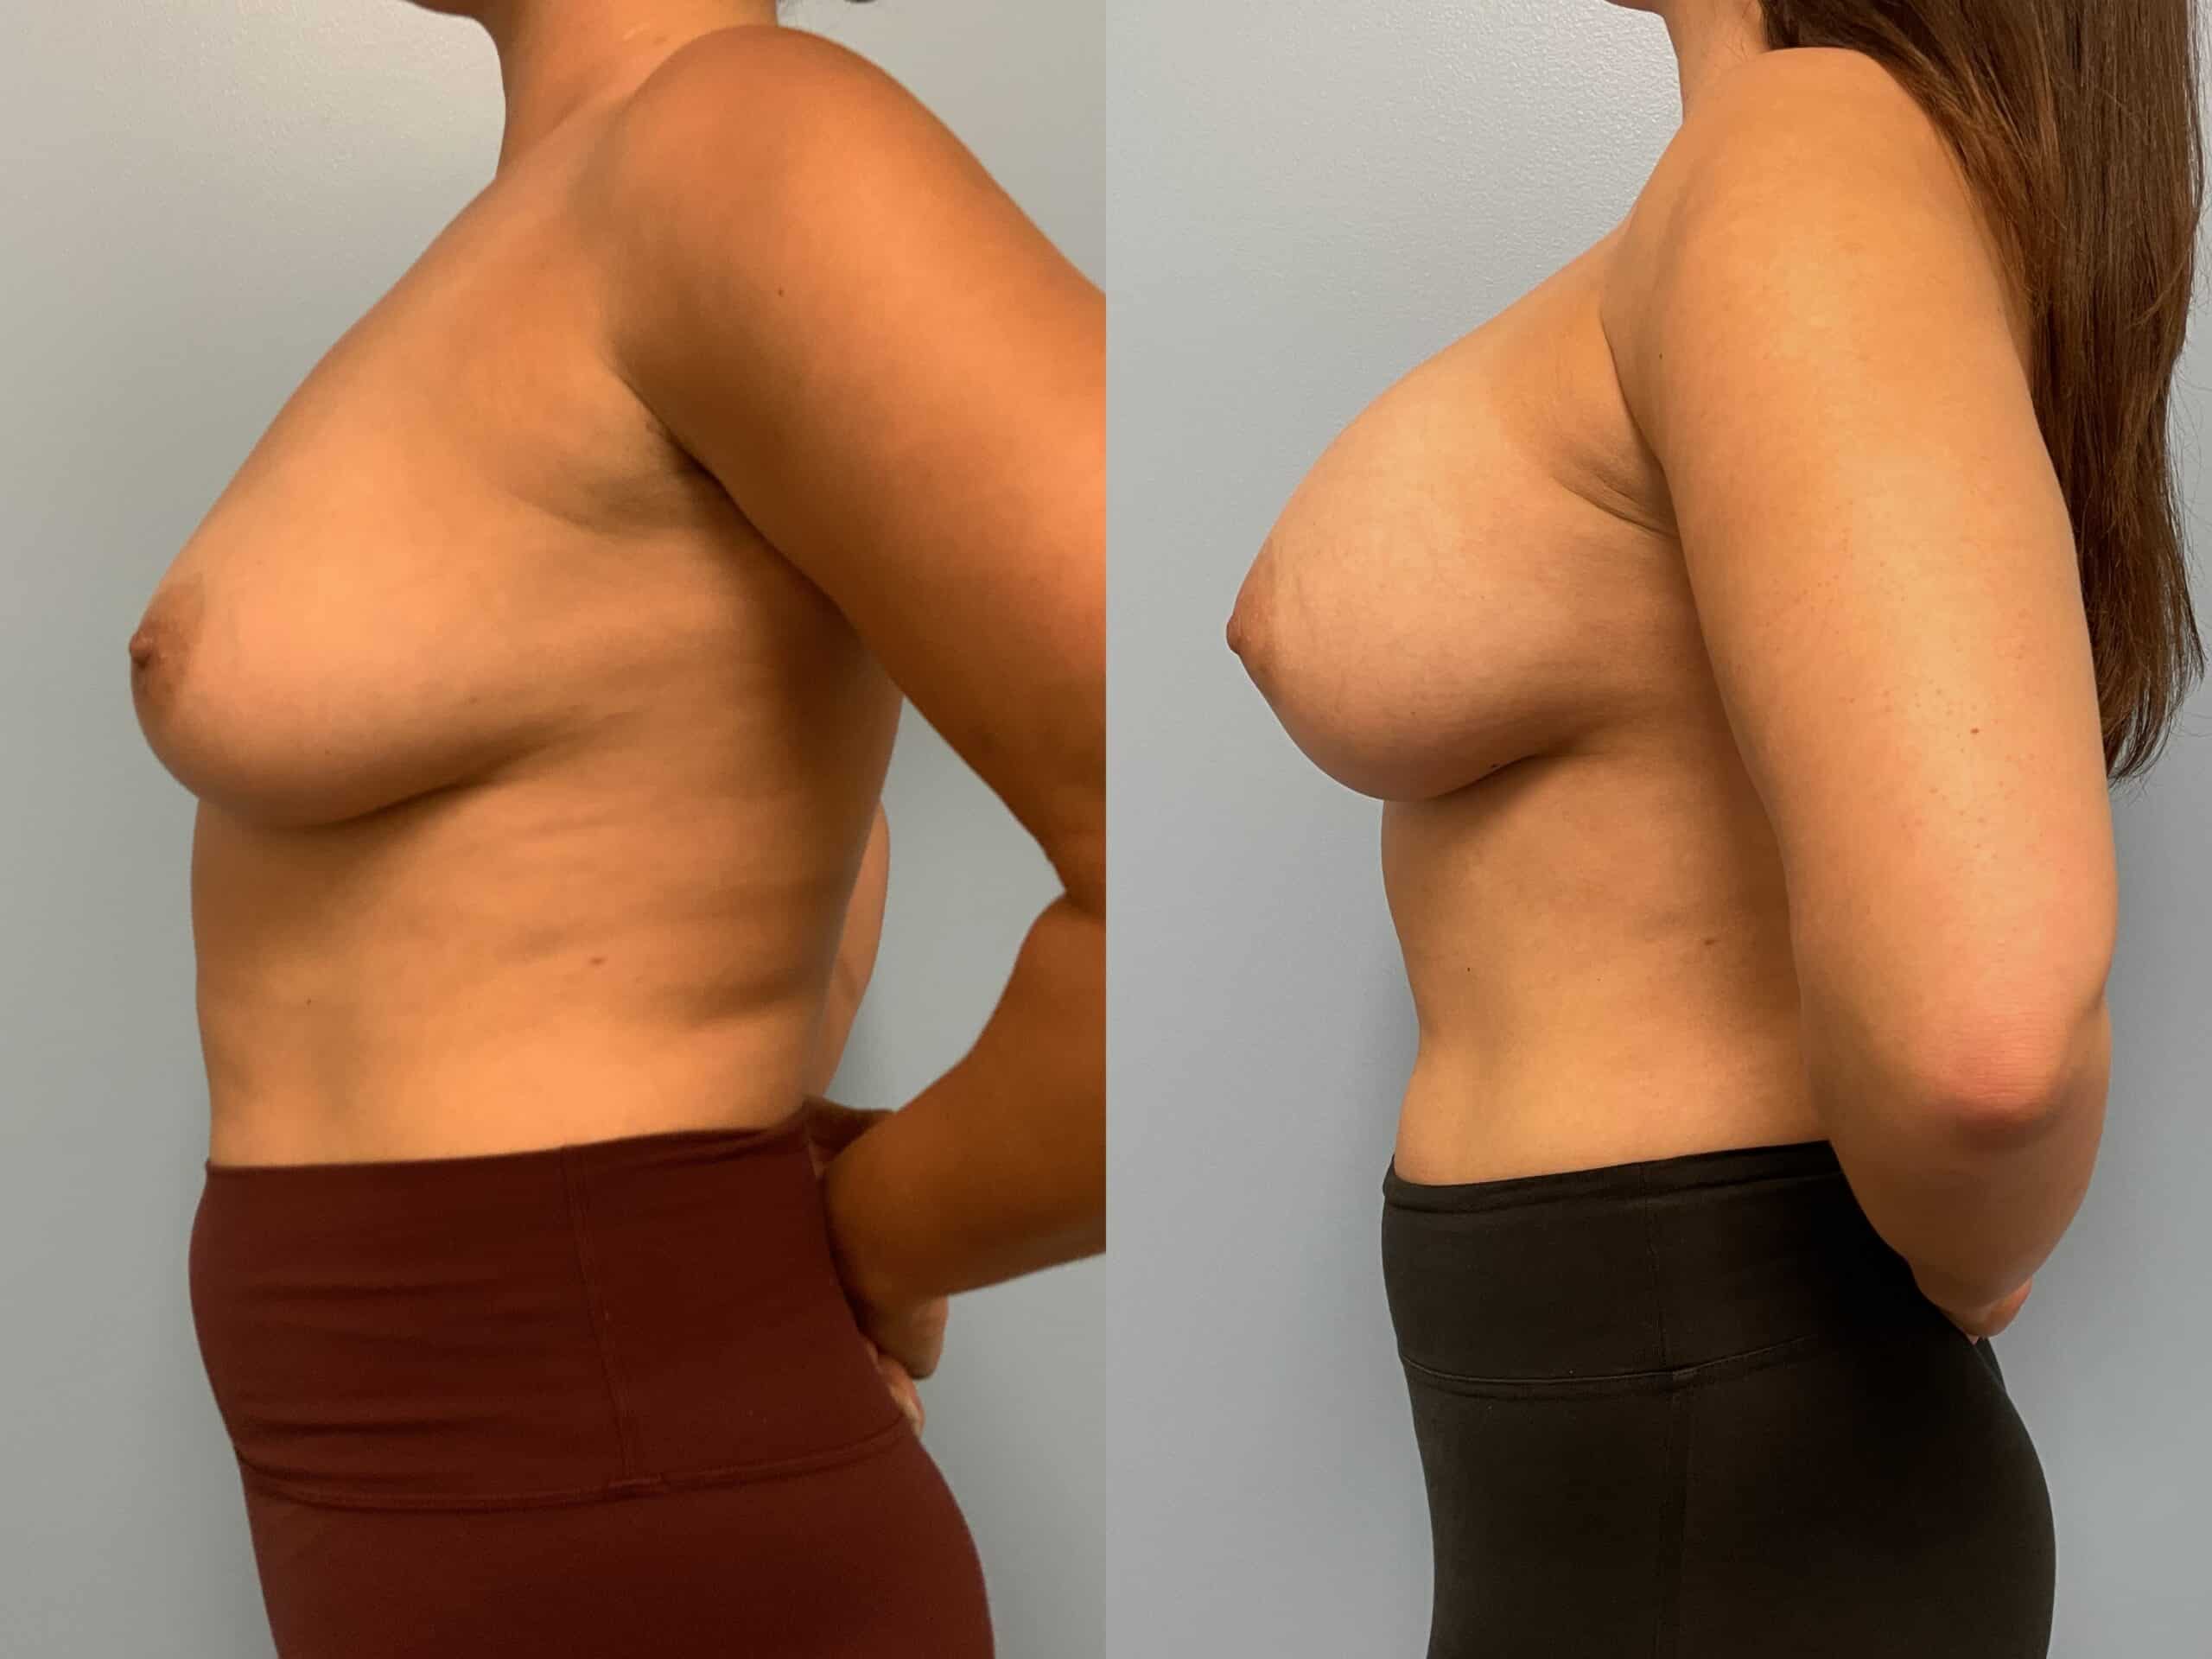 Before and after, patient 2 mo post op from Breast Augmentation, Level III Muscle Release, Strattice Inlay procedures performed by Dr. Paul Vanek